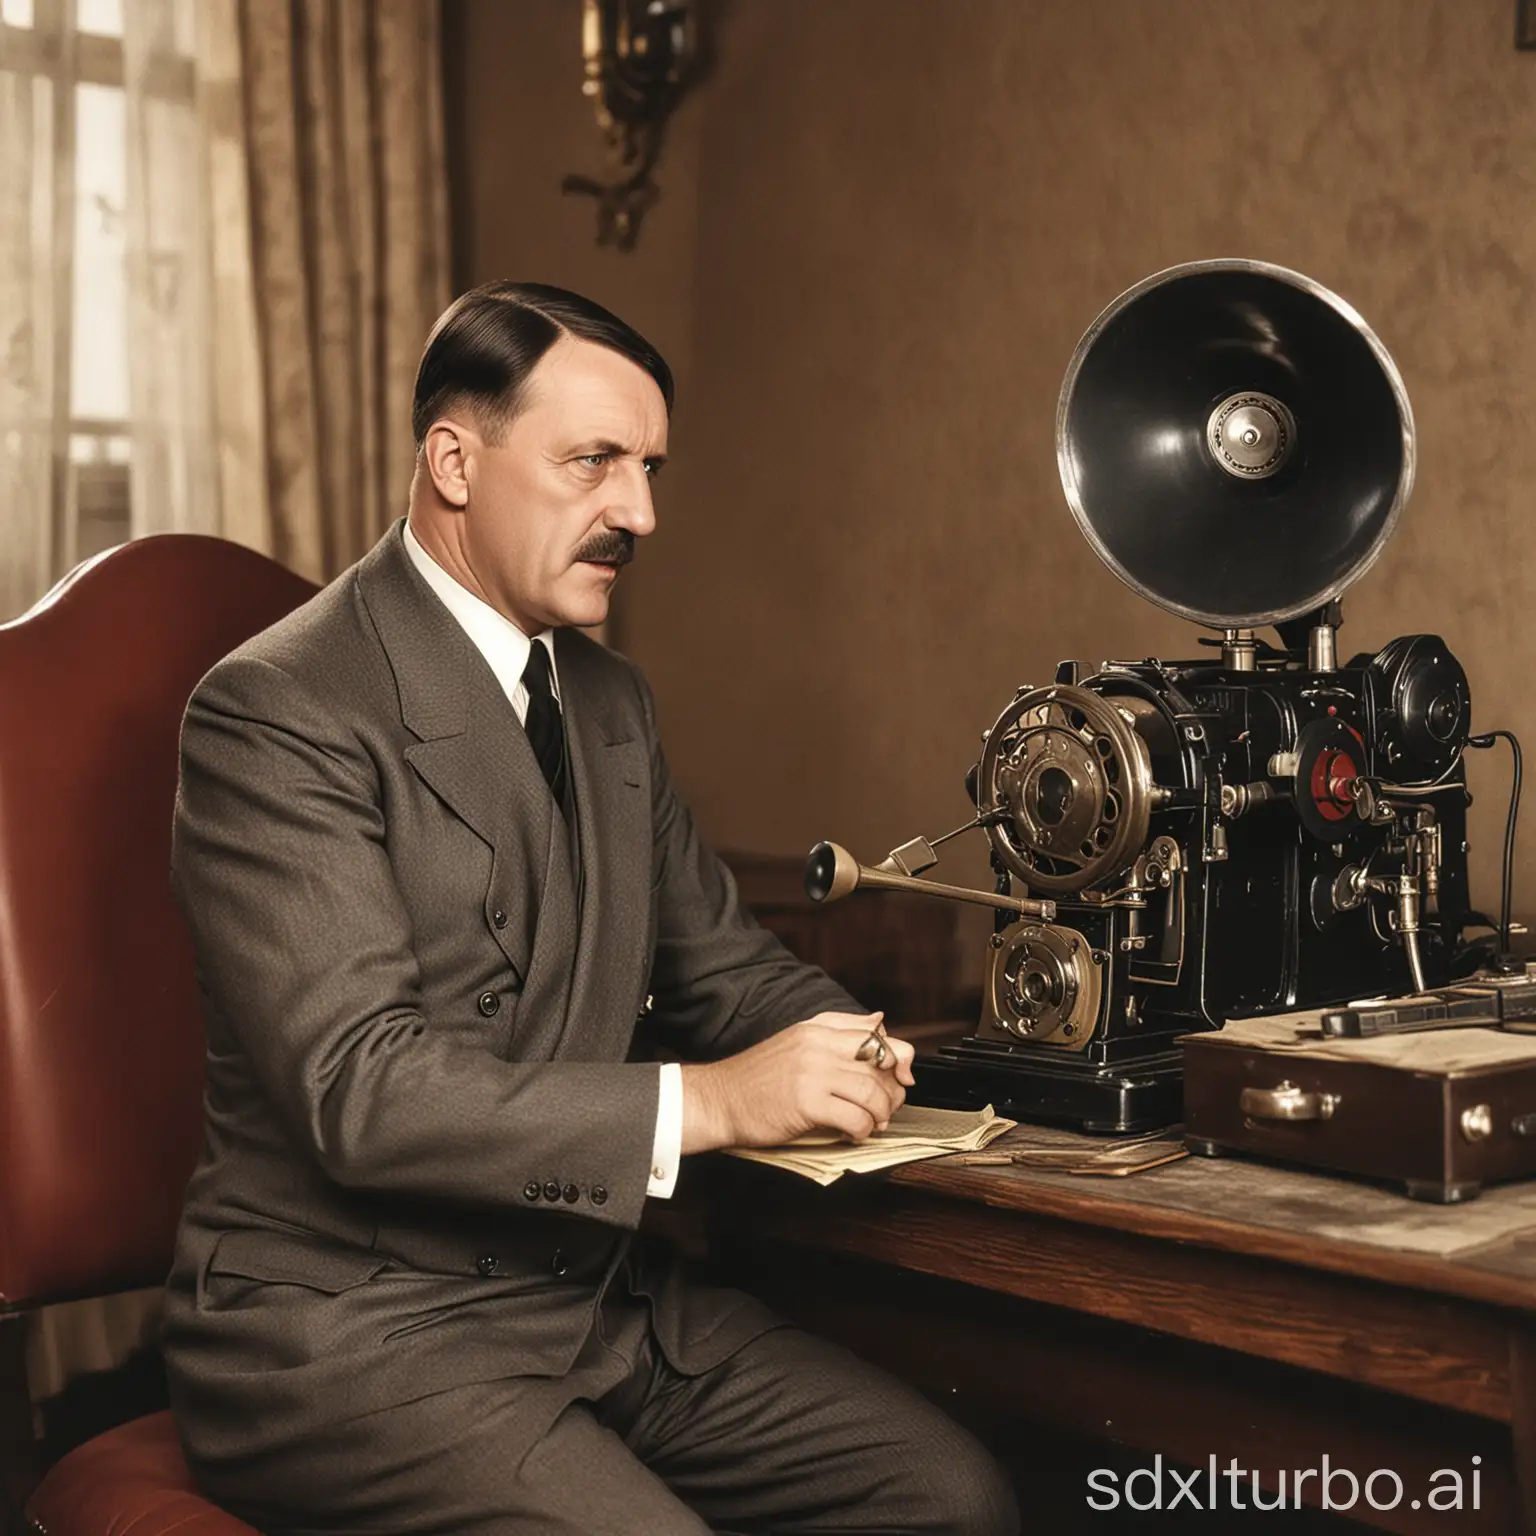 color photo of adolf hitler sitting next to old style grammophone